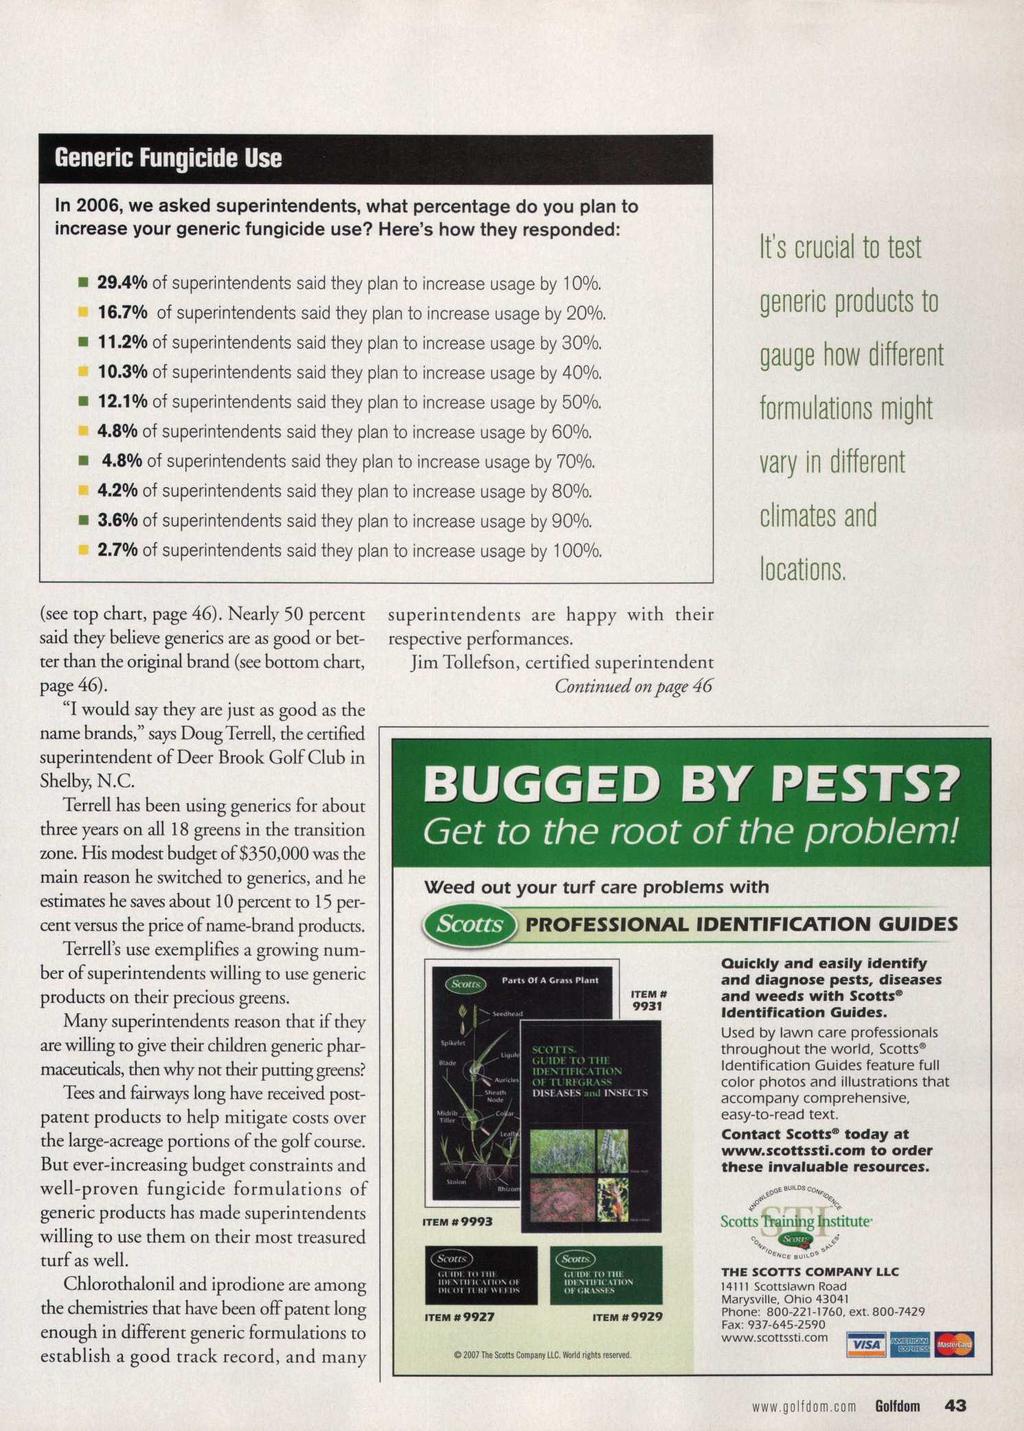 Generic Fungicide Use In 2006, we asked superintendents, what percentage do you plan to increase your generic fungicide use? Here's how they responded: 29.